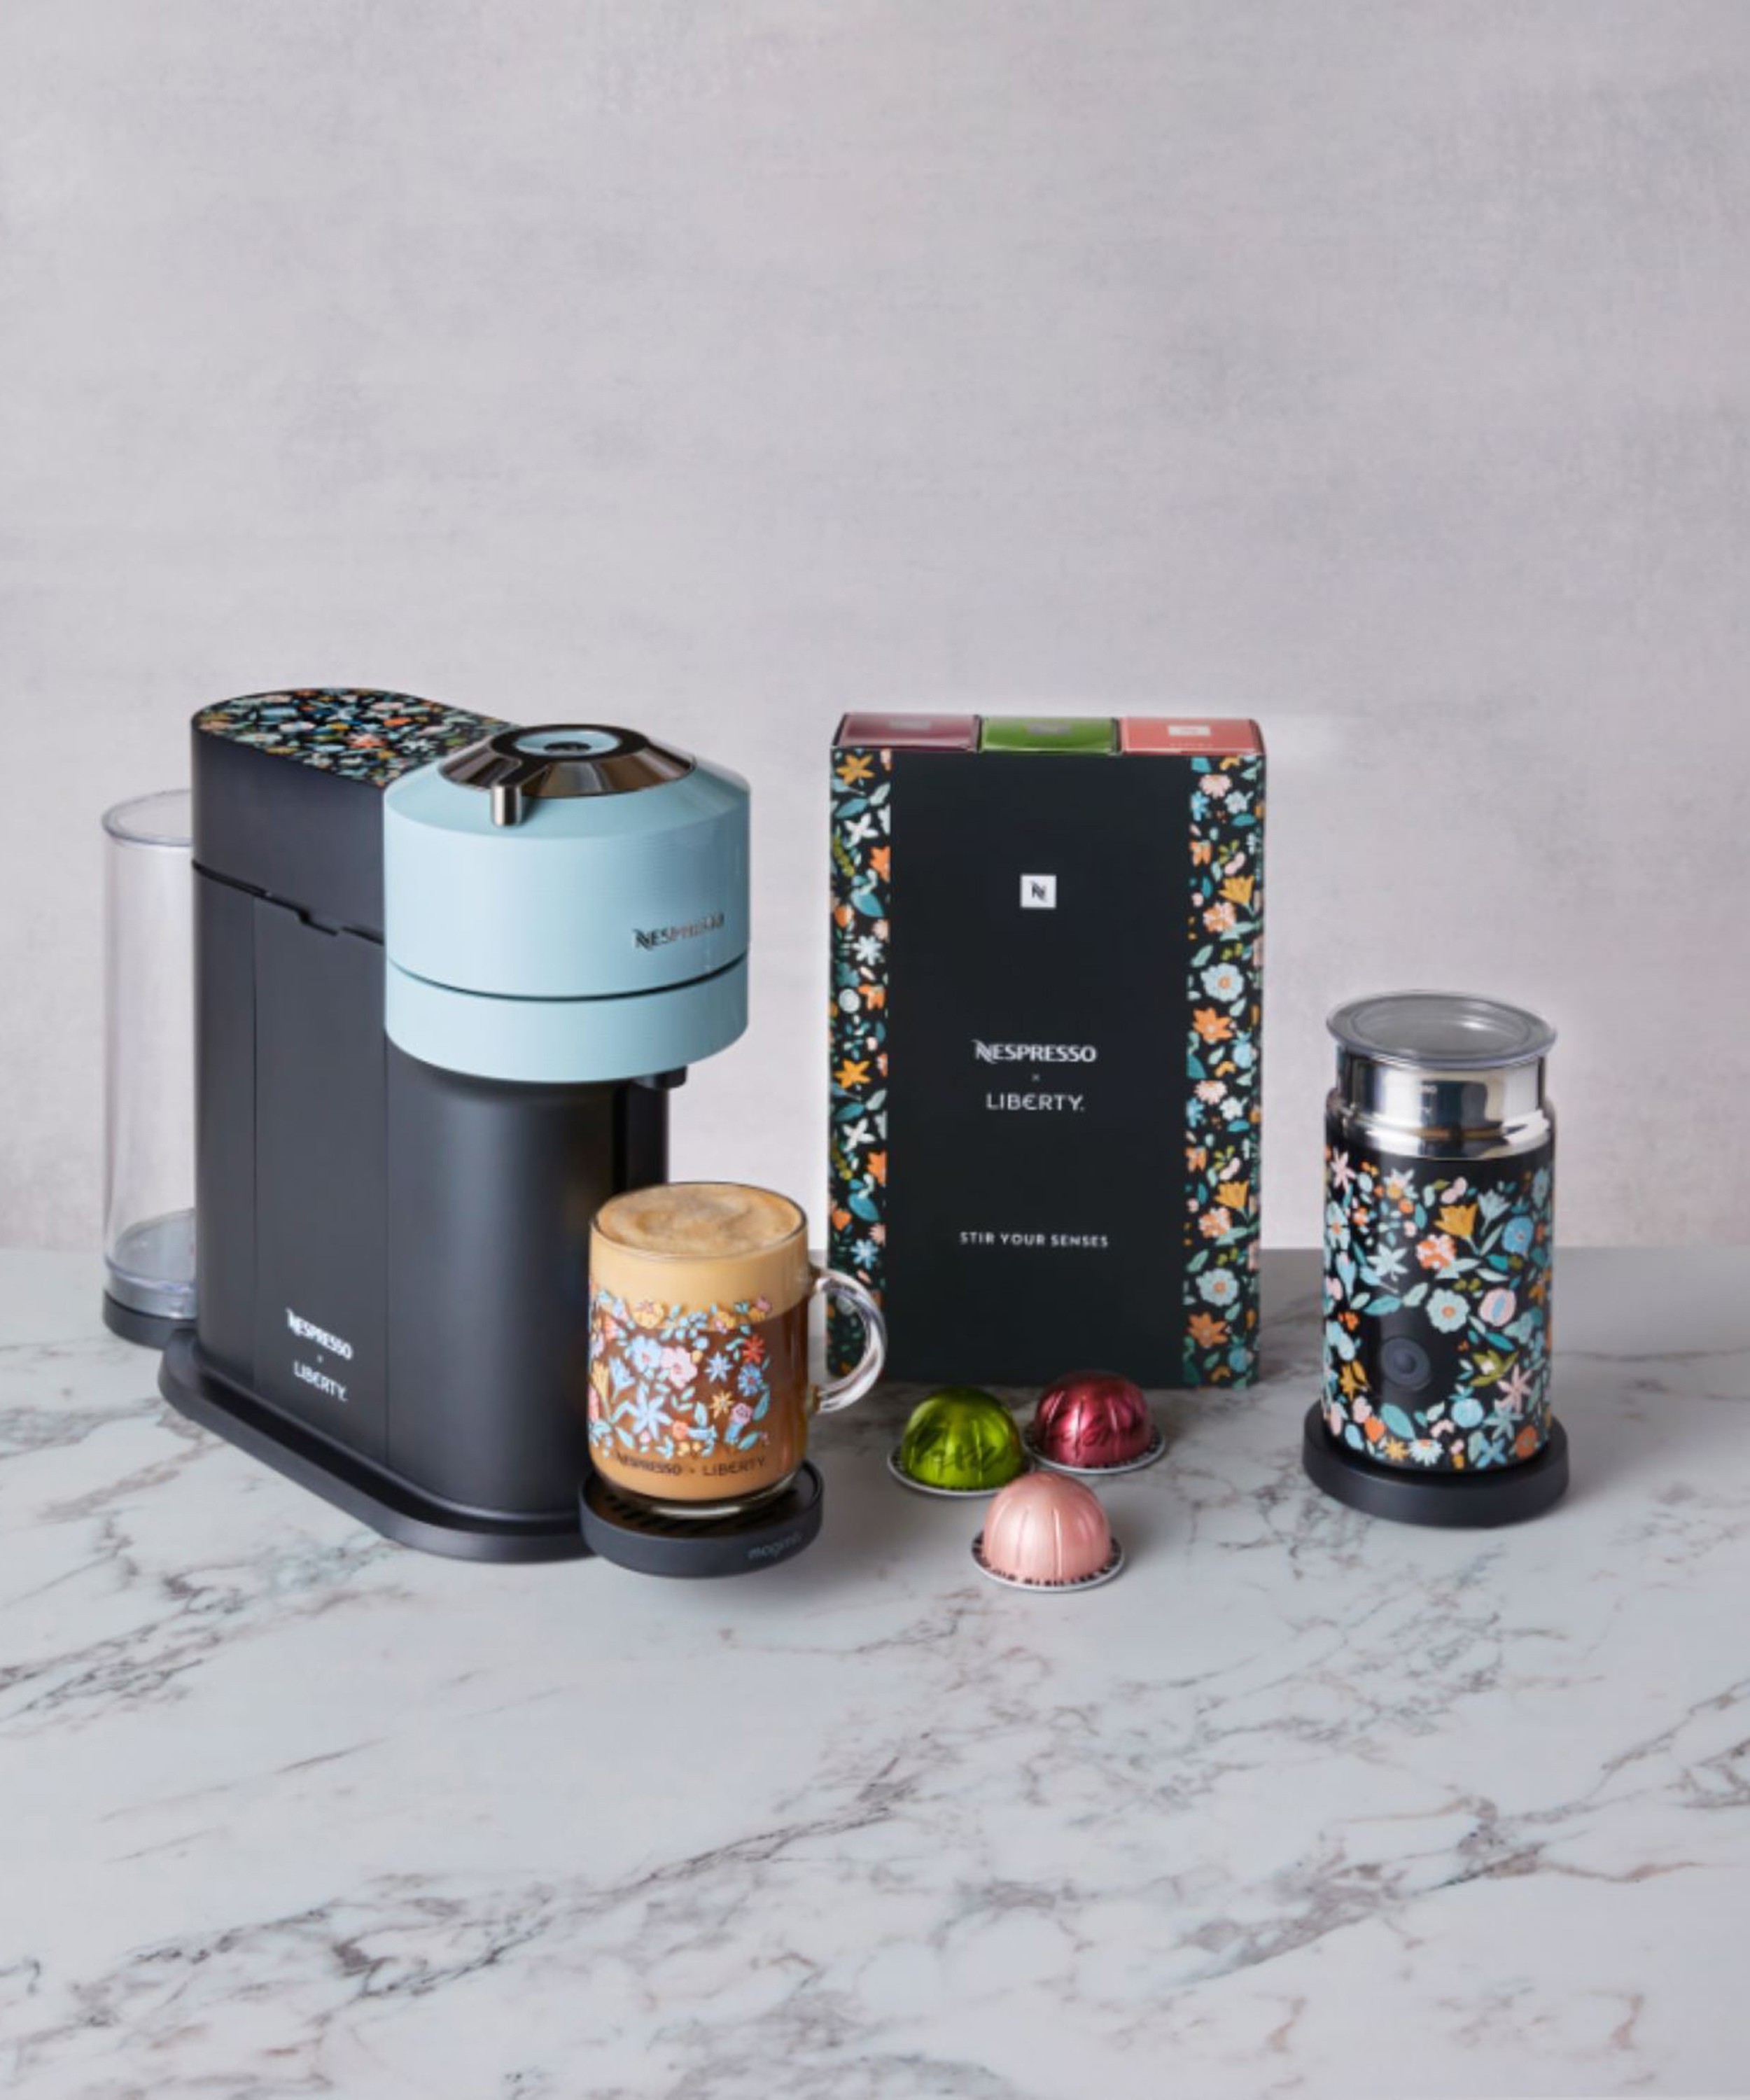 NESPRESSO x Liberty Limited Edition Vertuo Next Coffee Machine by Magimix